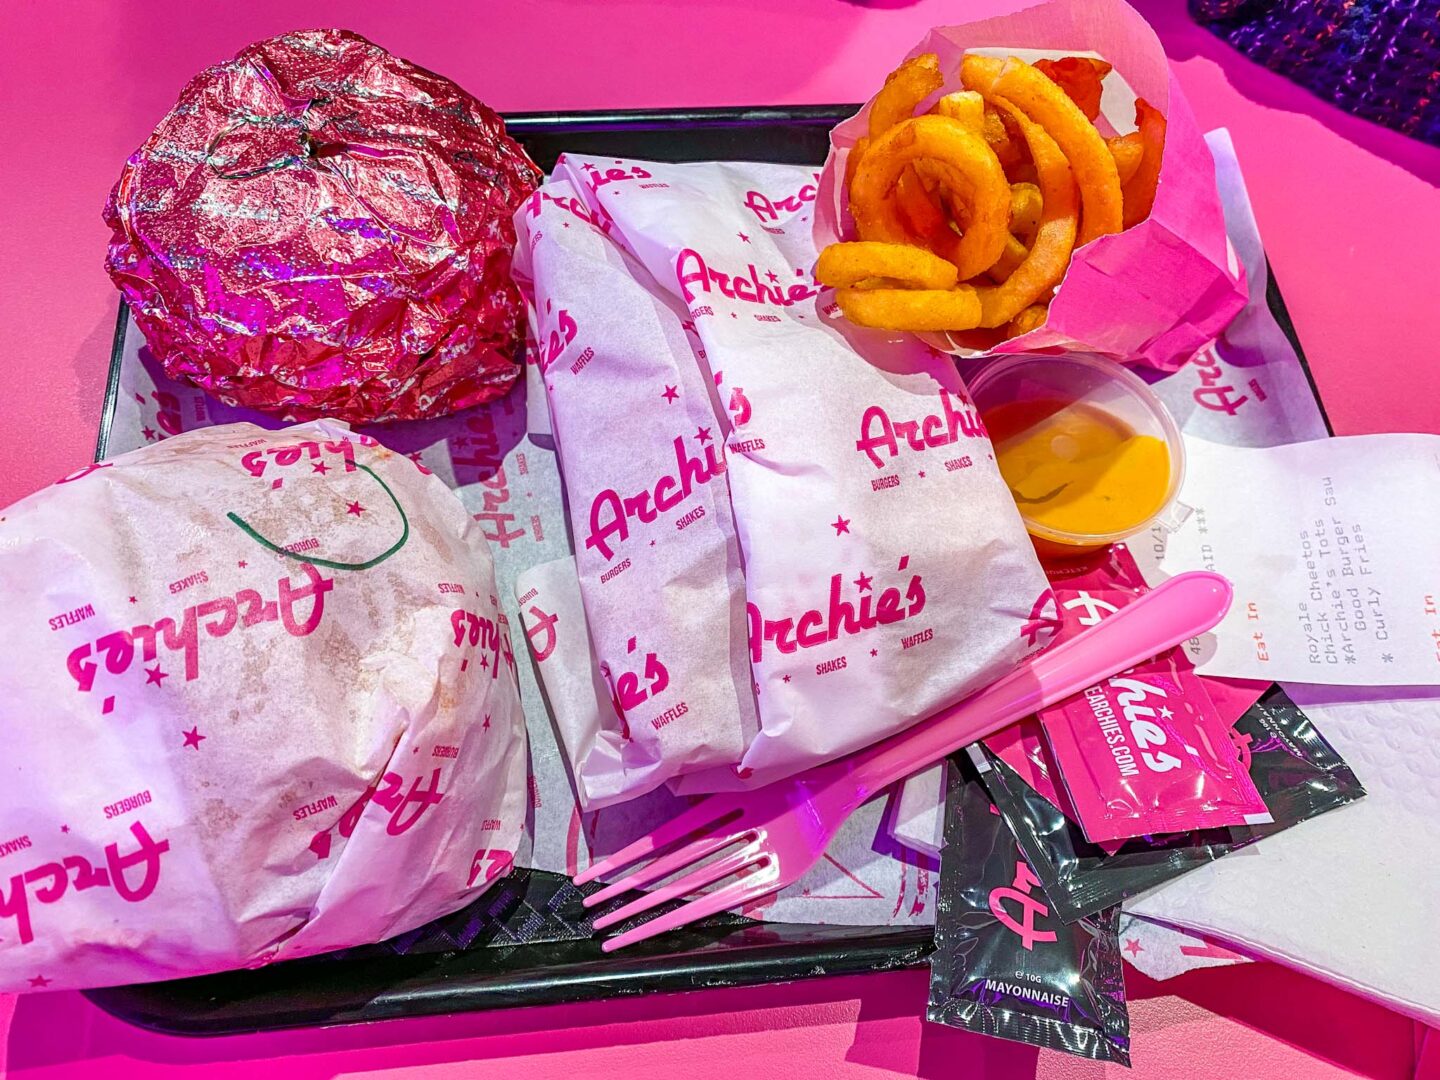 halal restaurants in manchester, archies food on pink tray, halal burger places Manchester